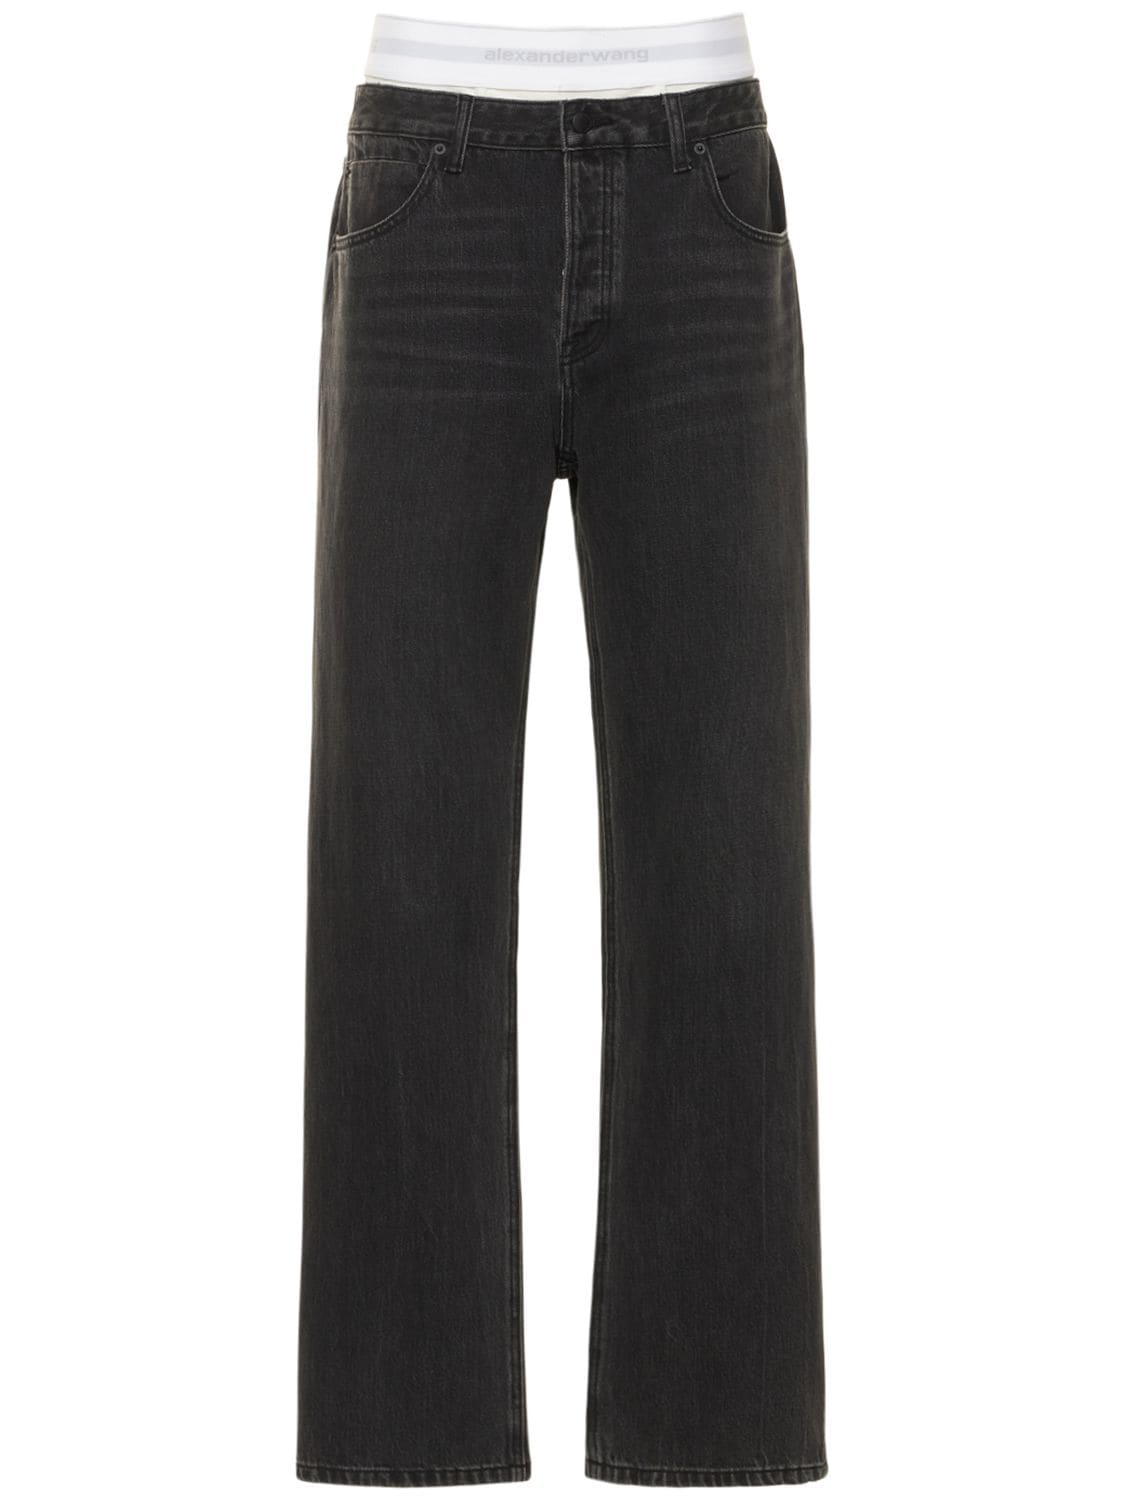 ALEXANDER WANG Low Rise Straight Jeans